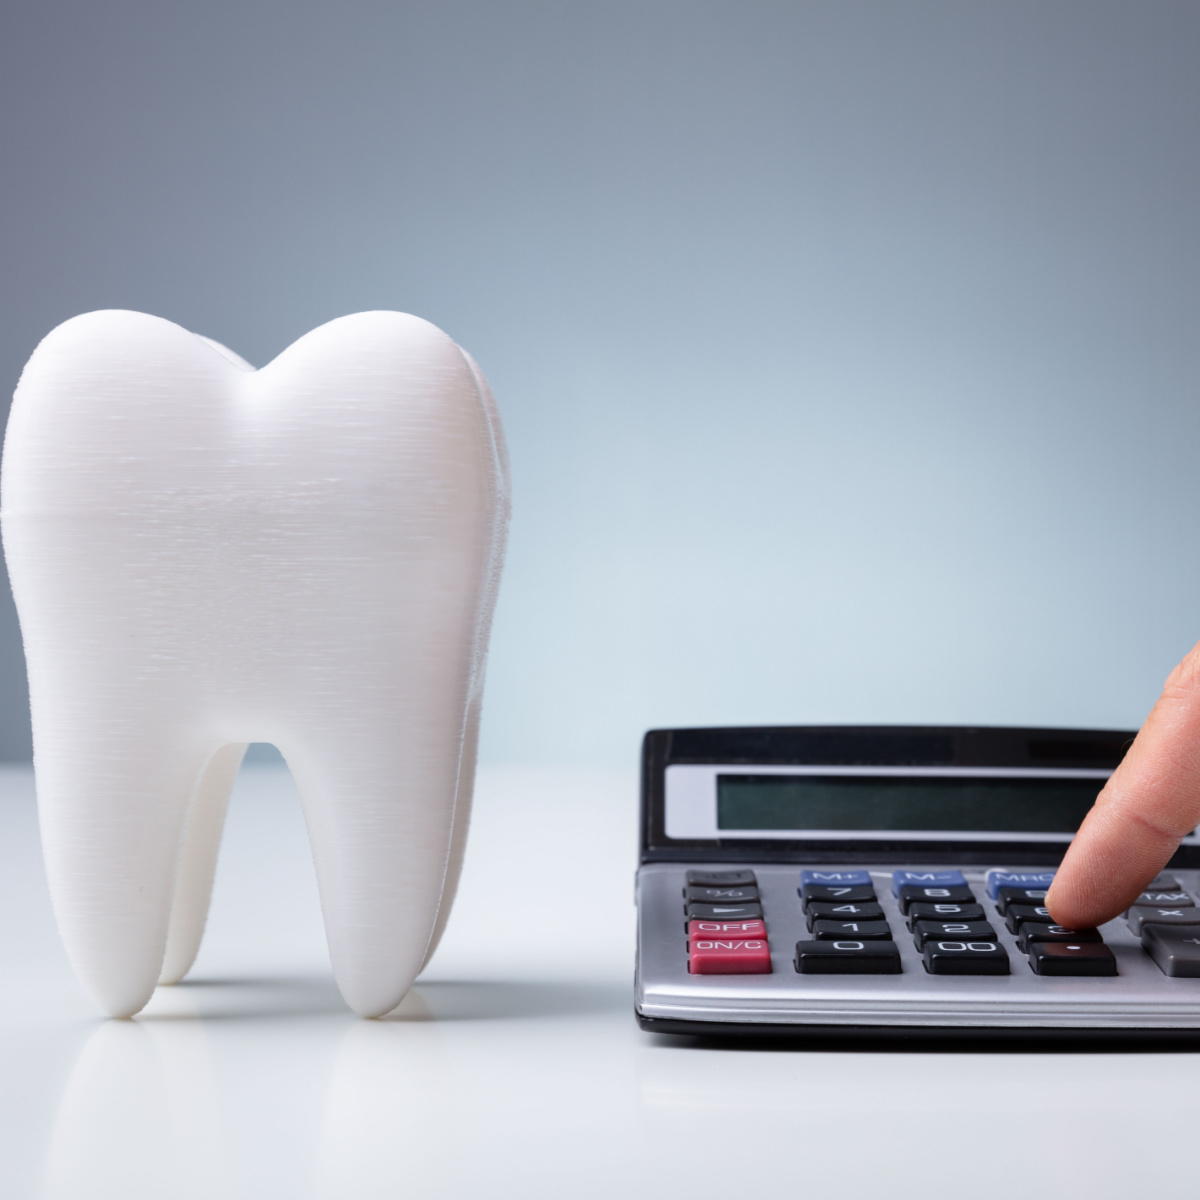 Use It or Lose It: Schedule Any South Houston Dentist Appointments You've Been Putting Off Before the End of the Year